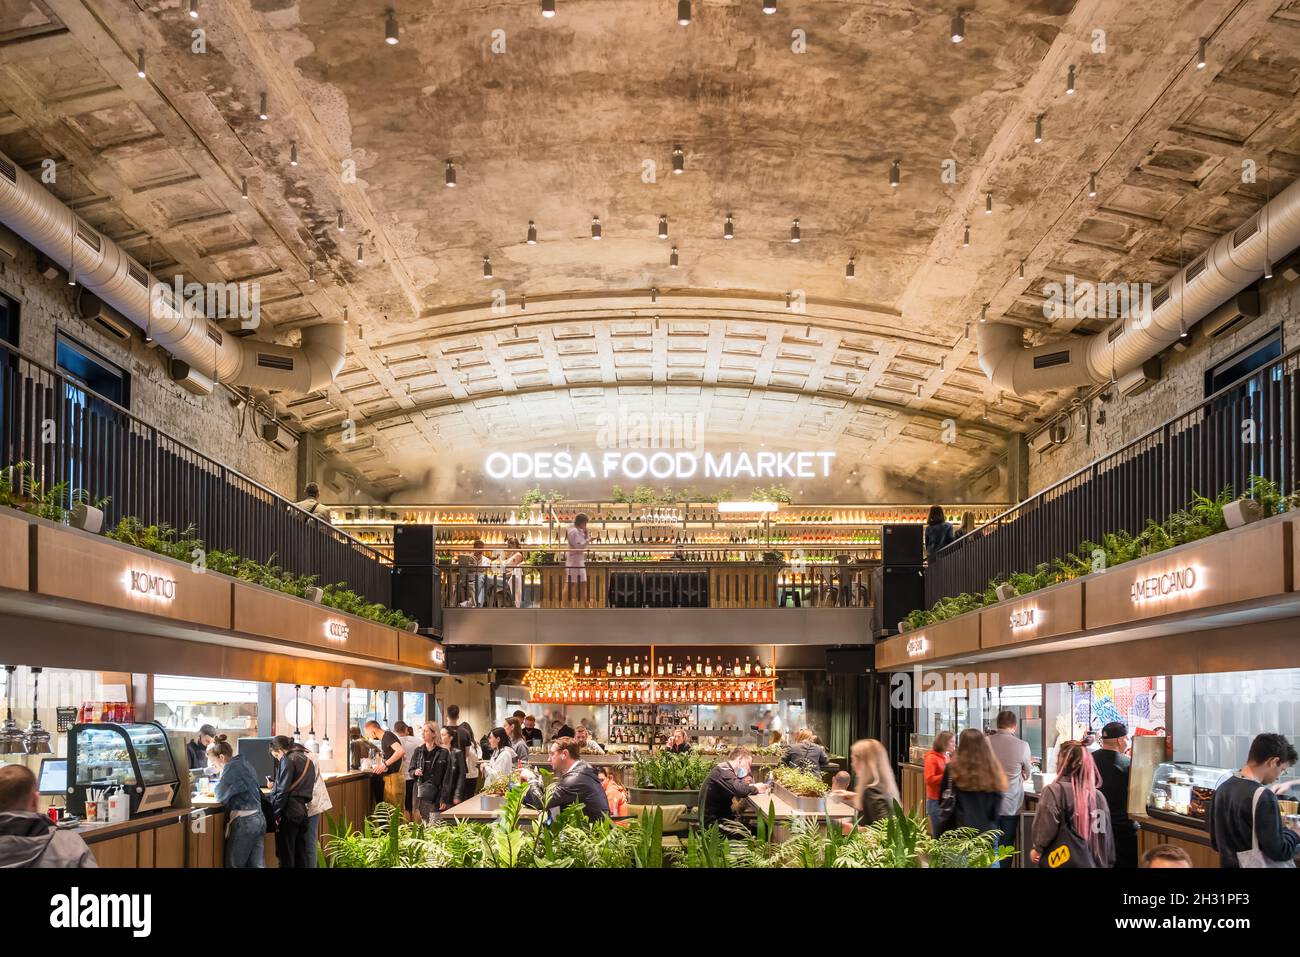 Interior of the Odessa Food Market modern urban cafe with different street food vendors in Odesa, Ukraine Stock Photo